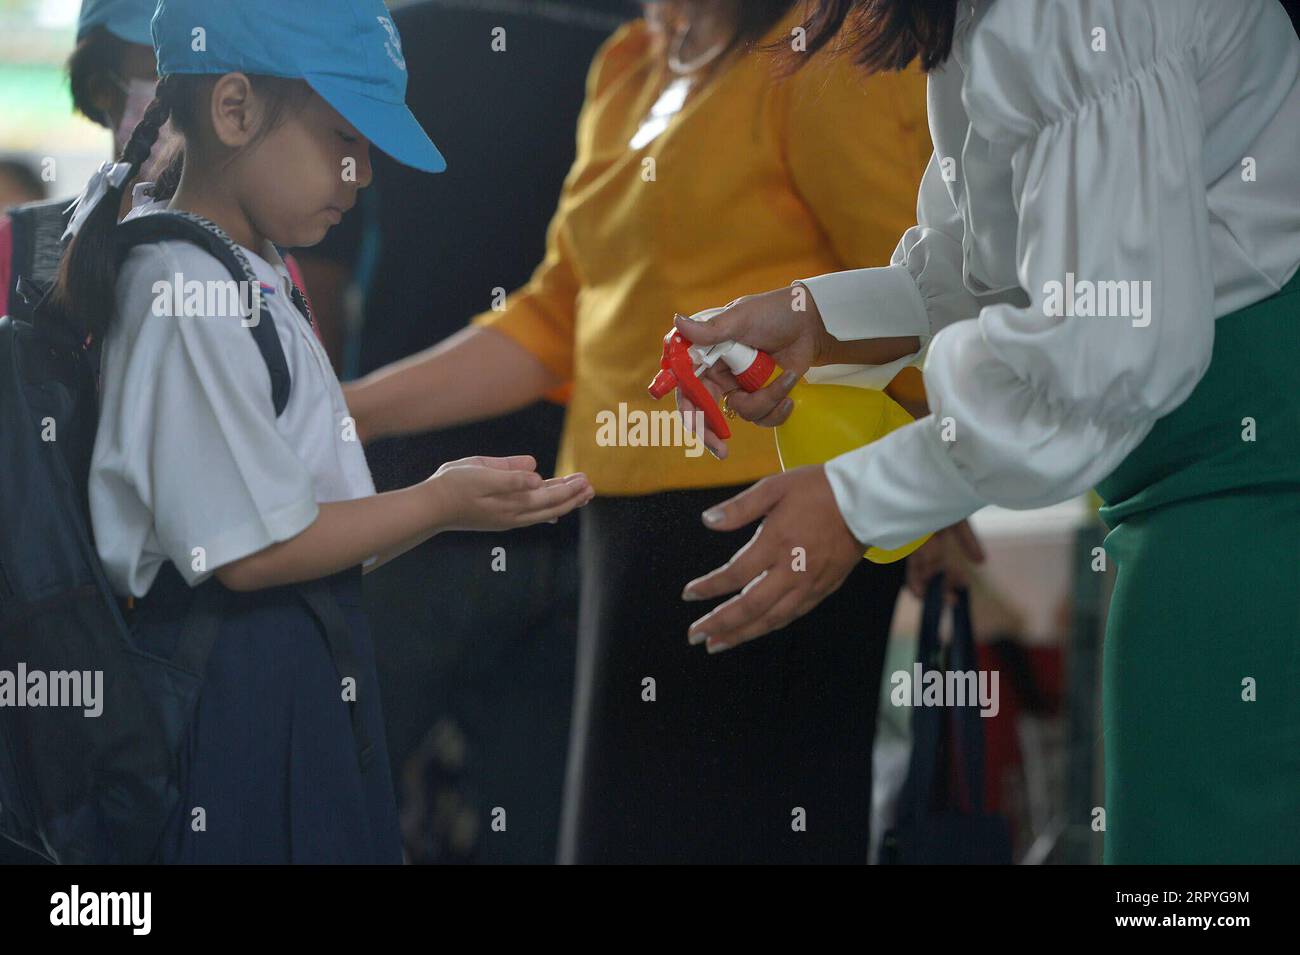 200701 -- BANGKOK, July 1, 2020 Xinhua -- A student has her hands sanitized at the entrance of a school in Bangkok, Thailand, July 1, 2020. Schools in Thailand reopened on Wednesday. Xinhua/Rachen Sageamsak THAILAND-BANGKOK-COVID-19-SCHOOL-REOPENING PUBLICATIONxNOTxINxCHN Stock Photo